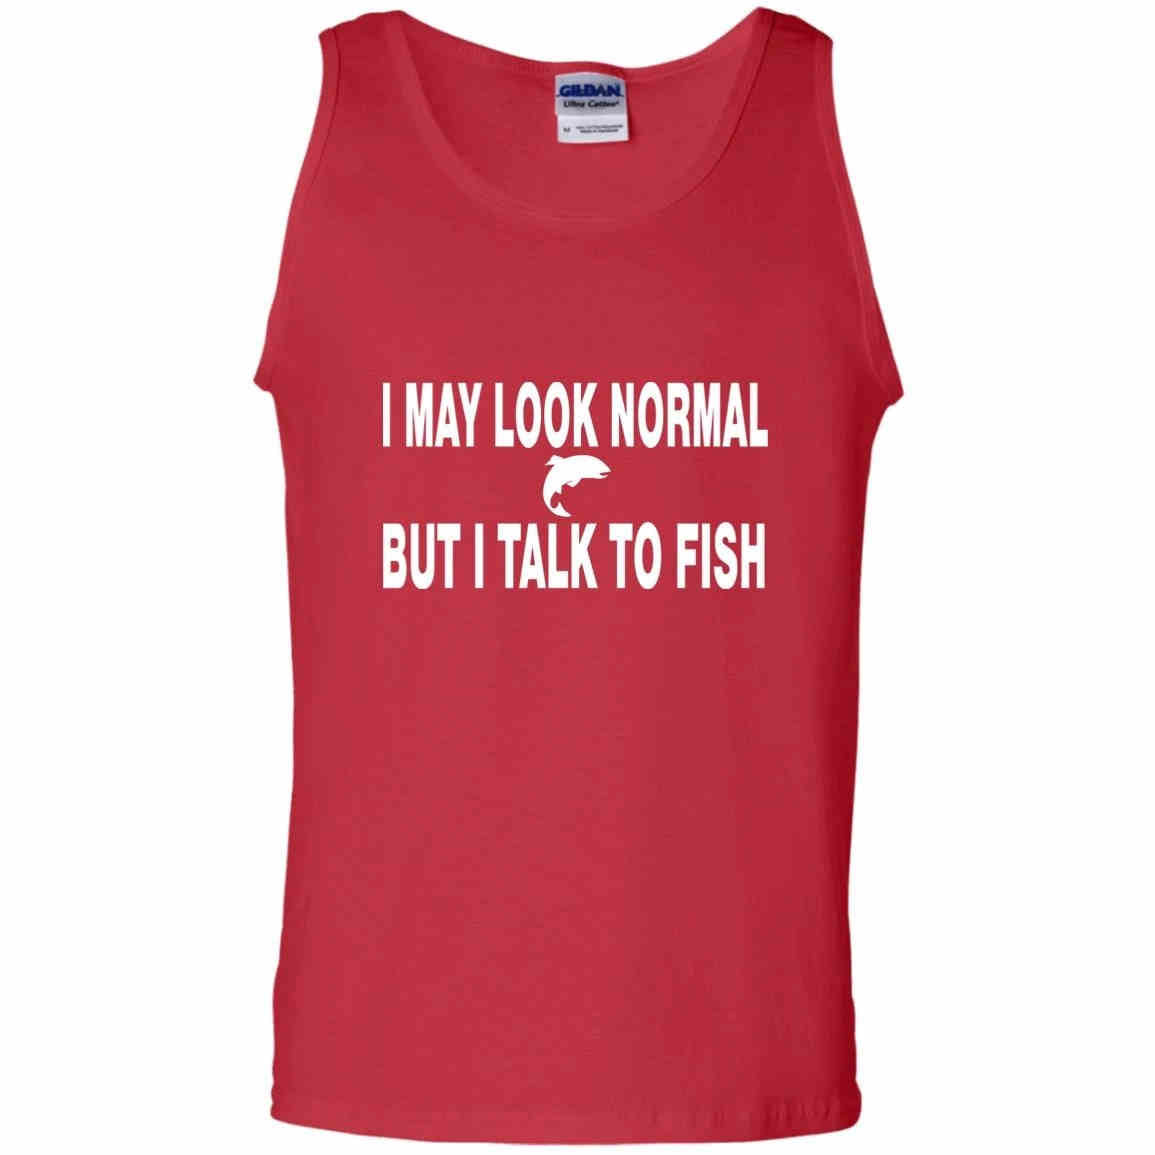 I may look normal but i talk to fish w tank top red